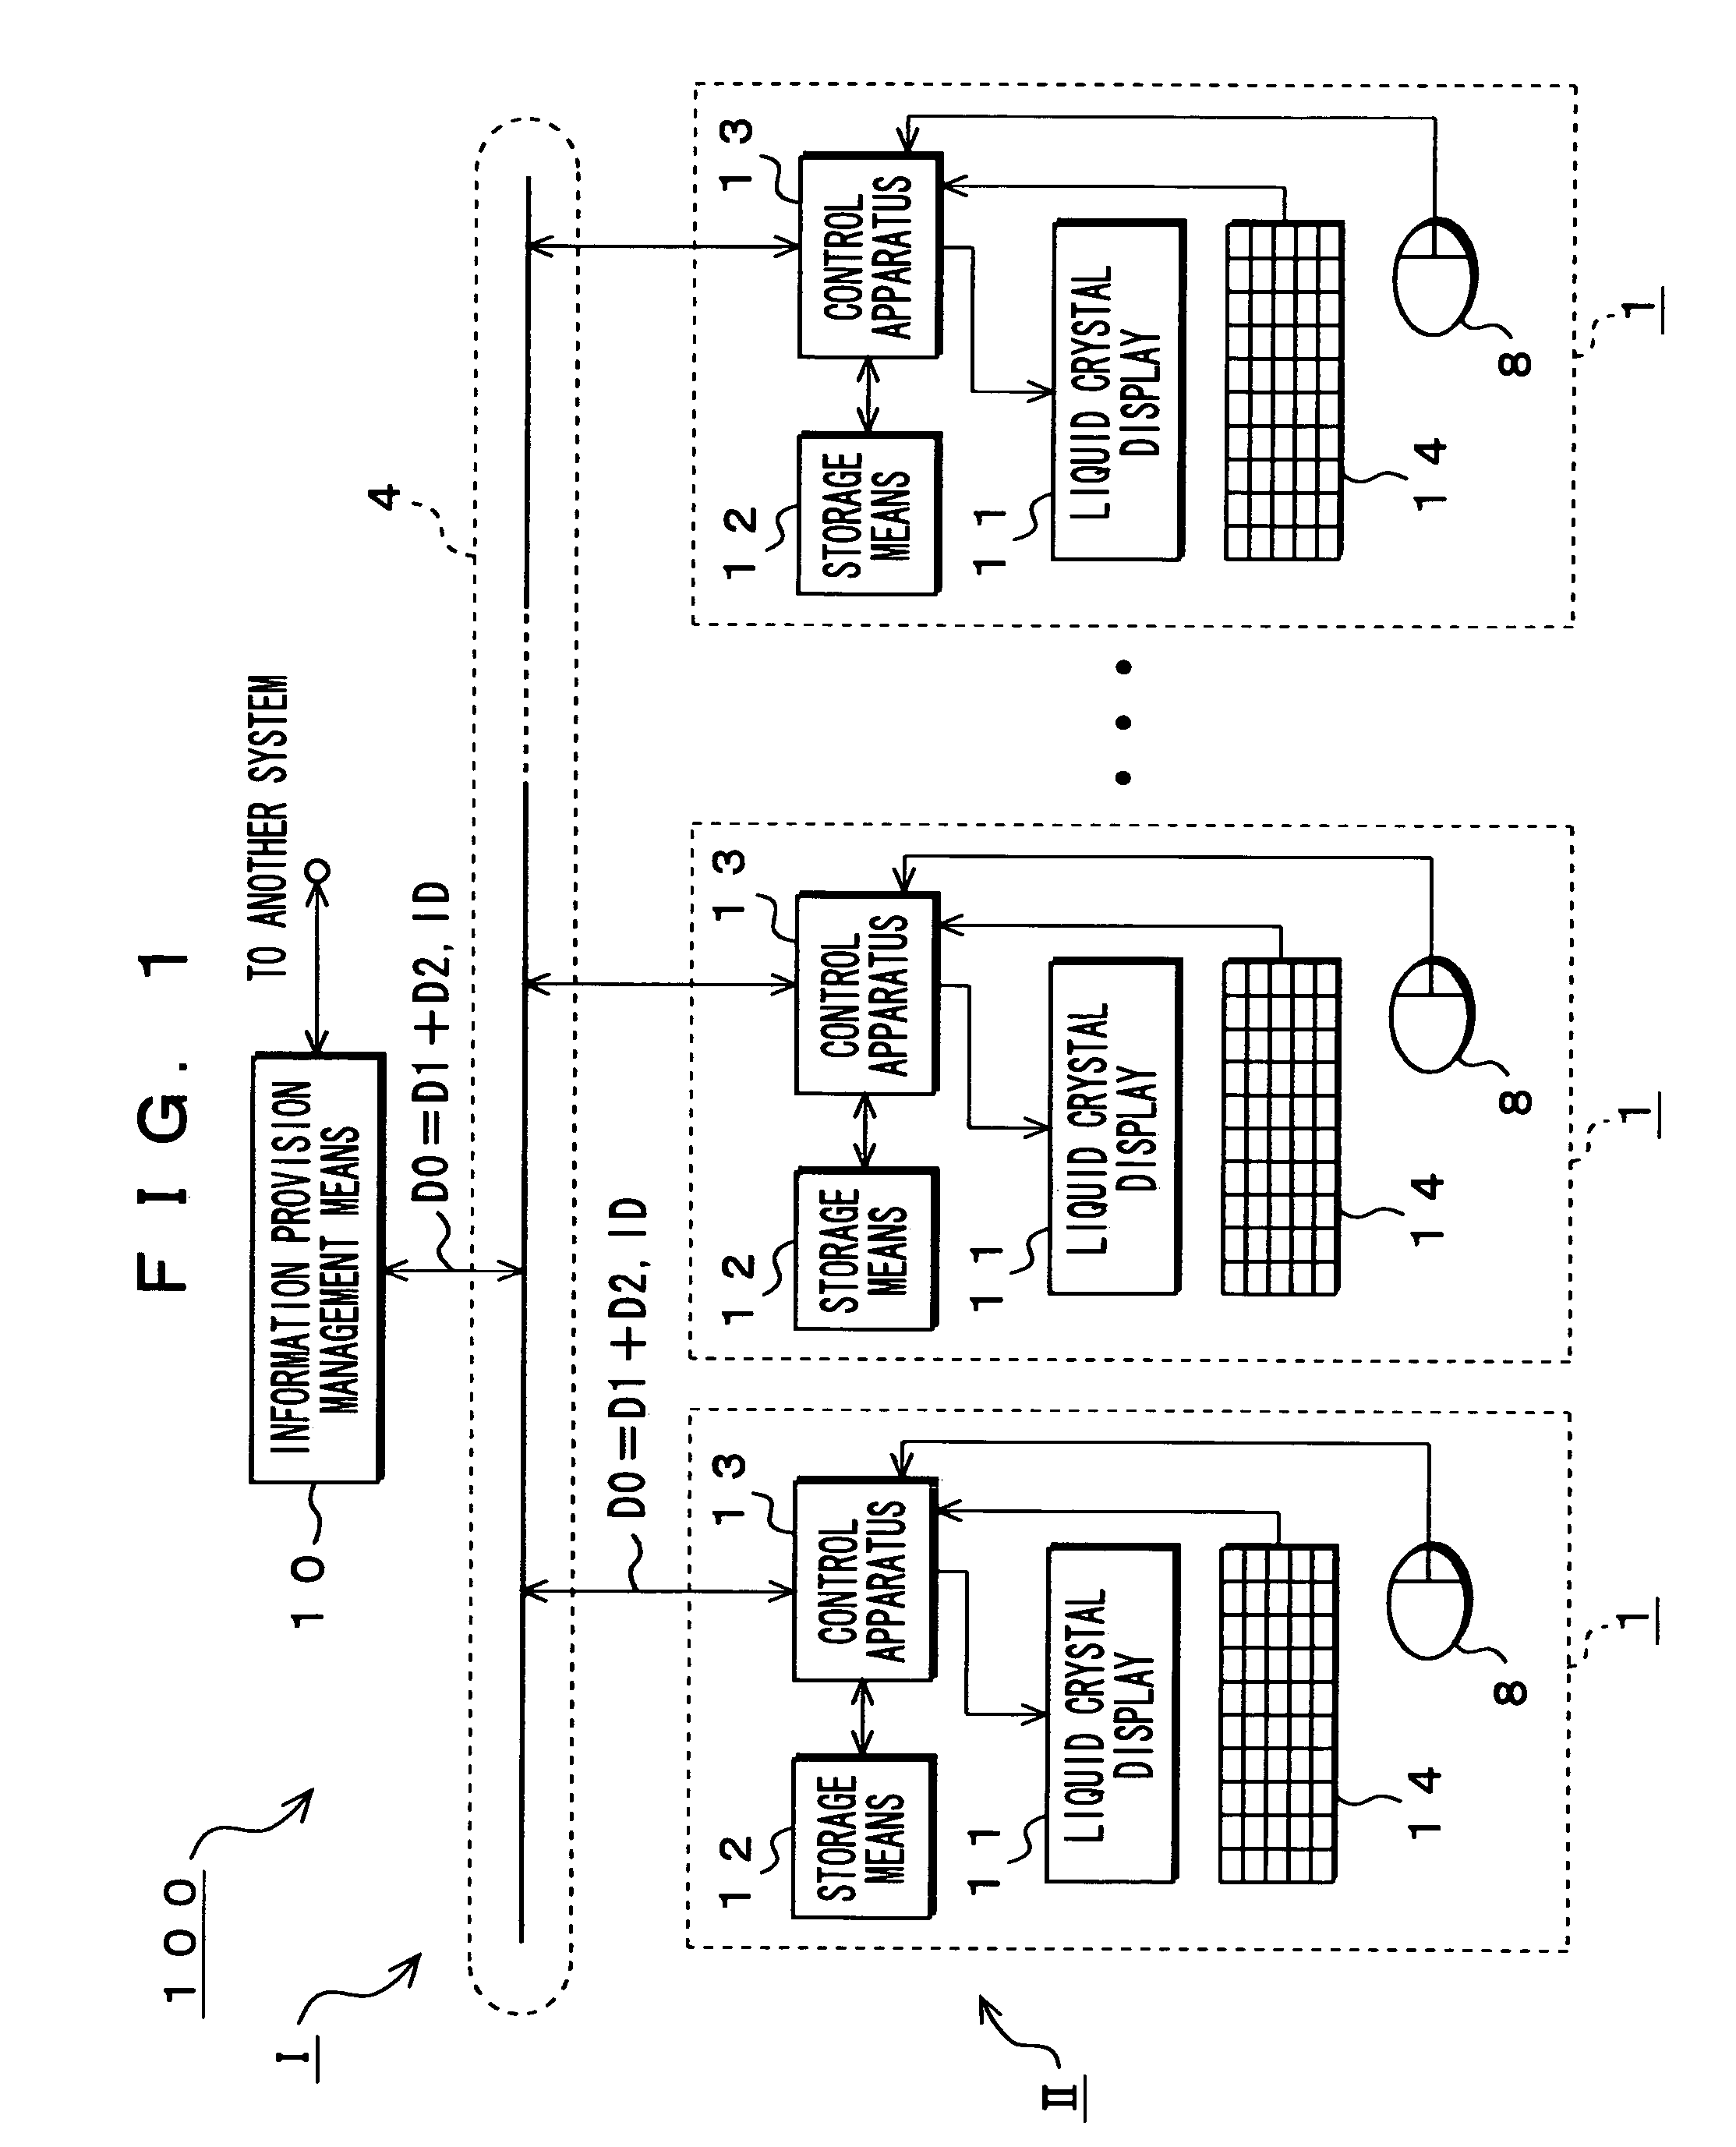 Network information processing system, information providing management apparatus, information processing apparatus, and information processing method